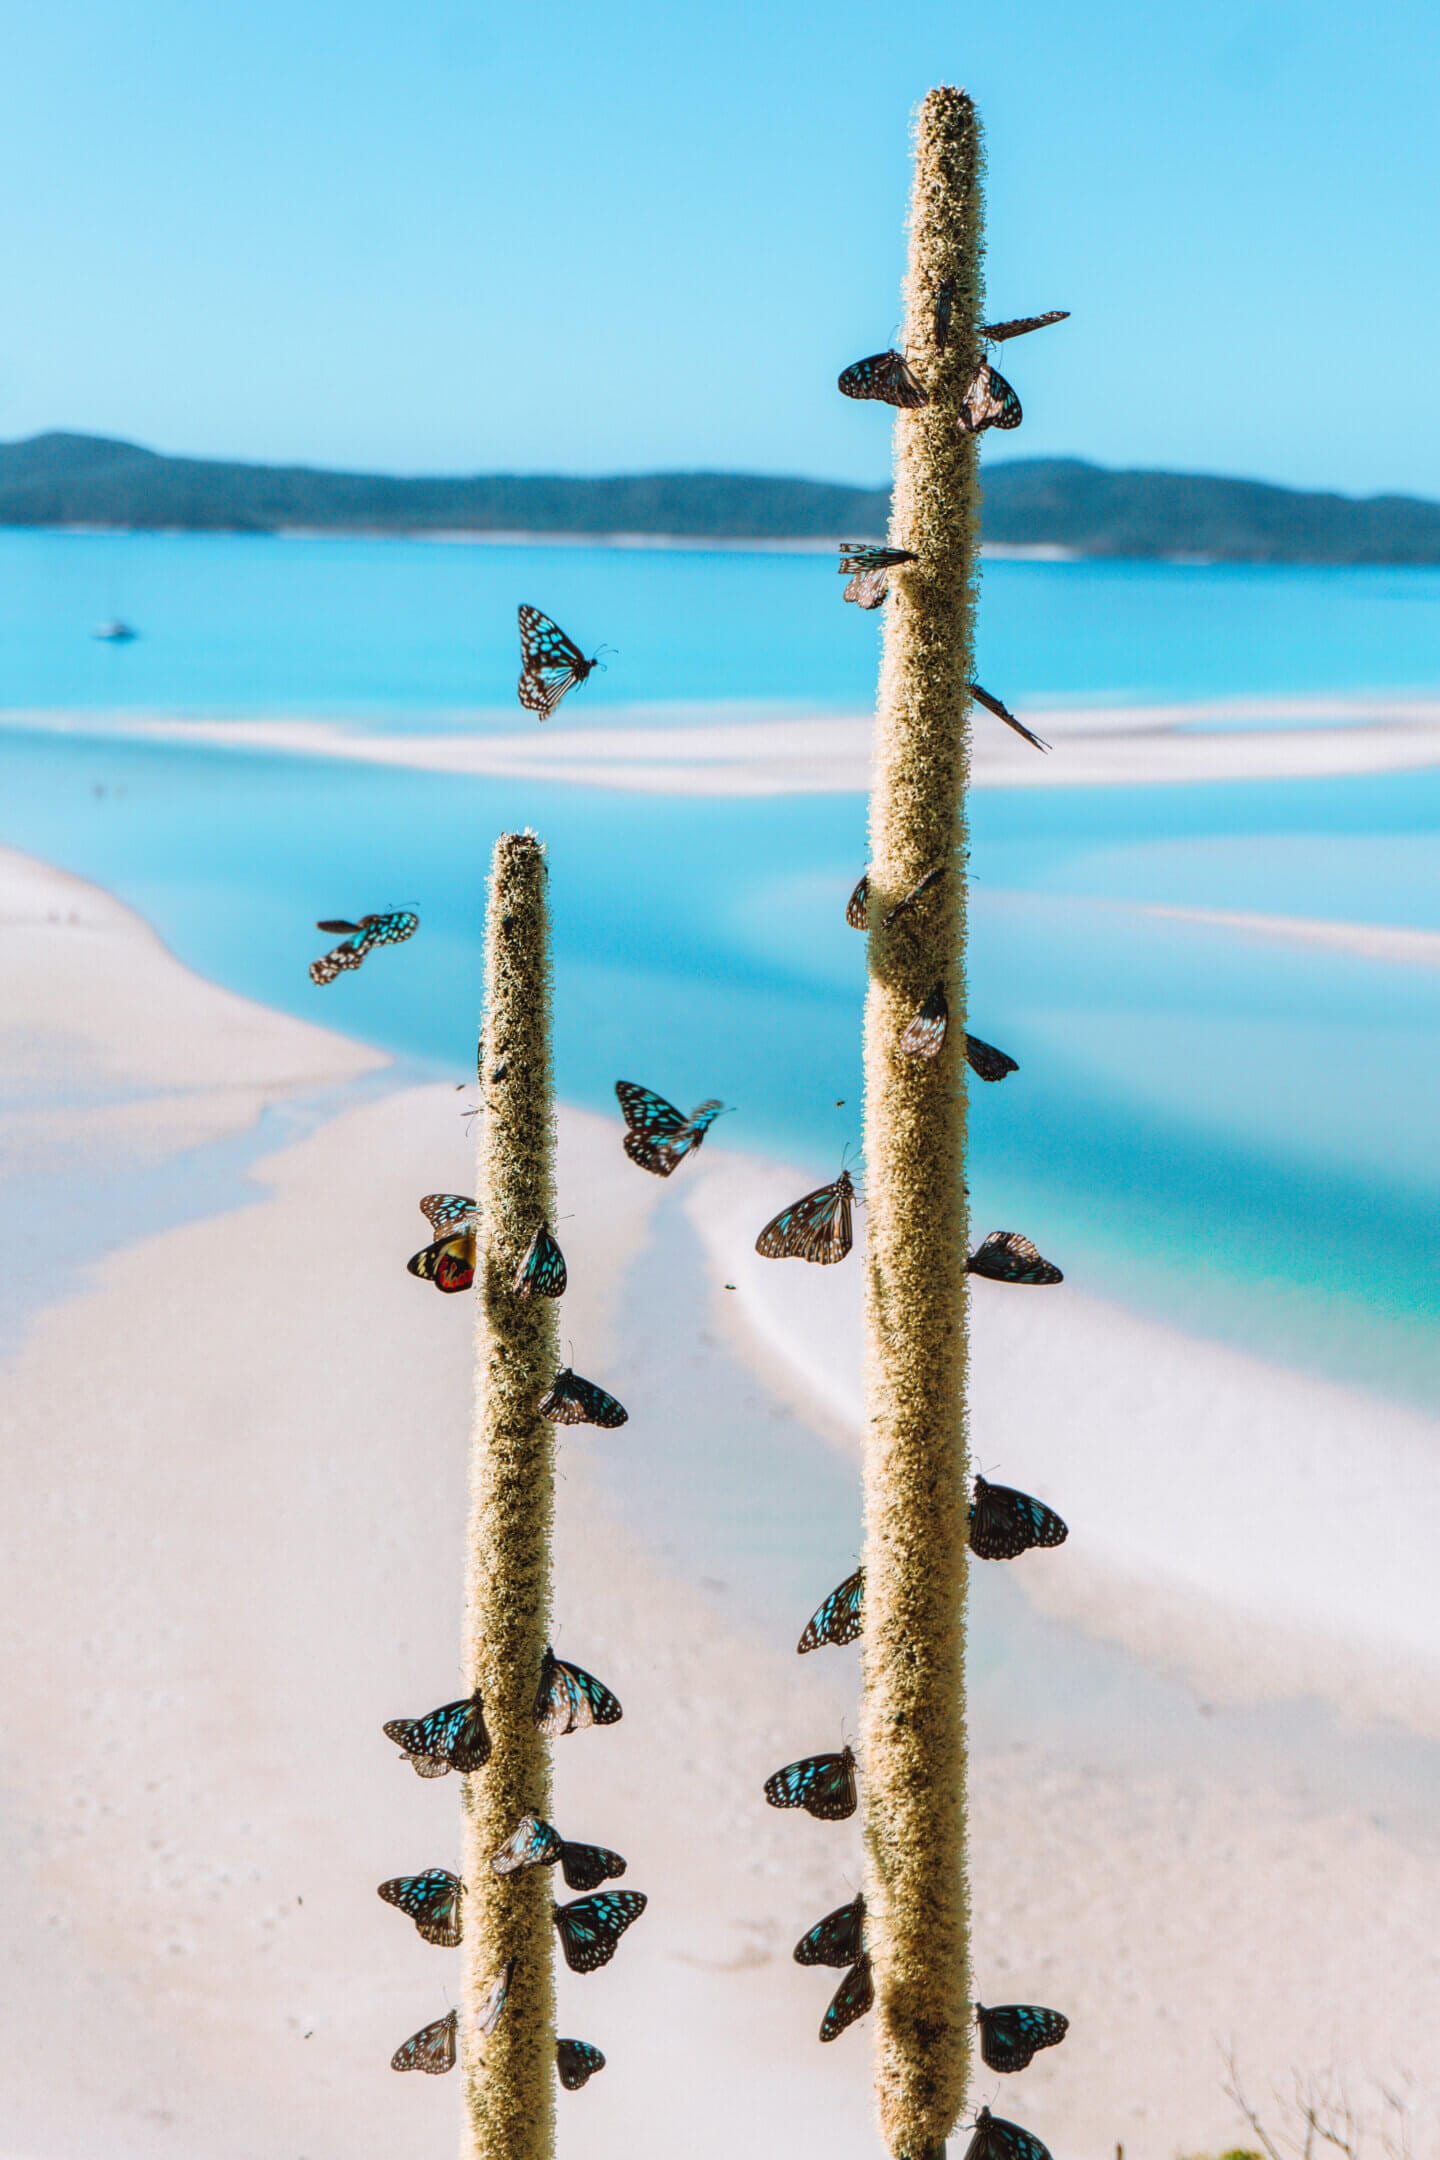 Butterflies feeding with Whitehaven Beach in the background